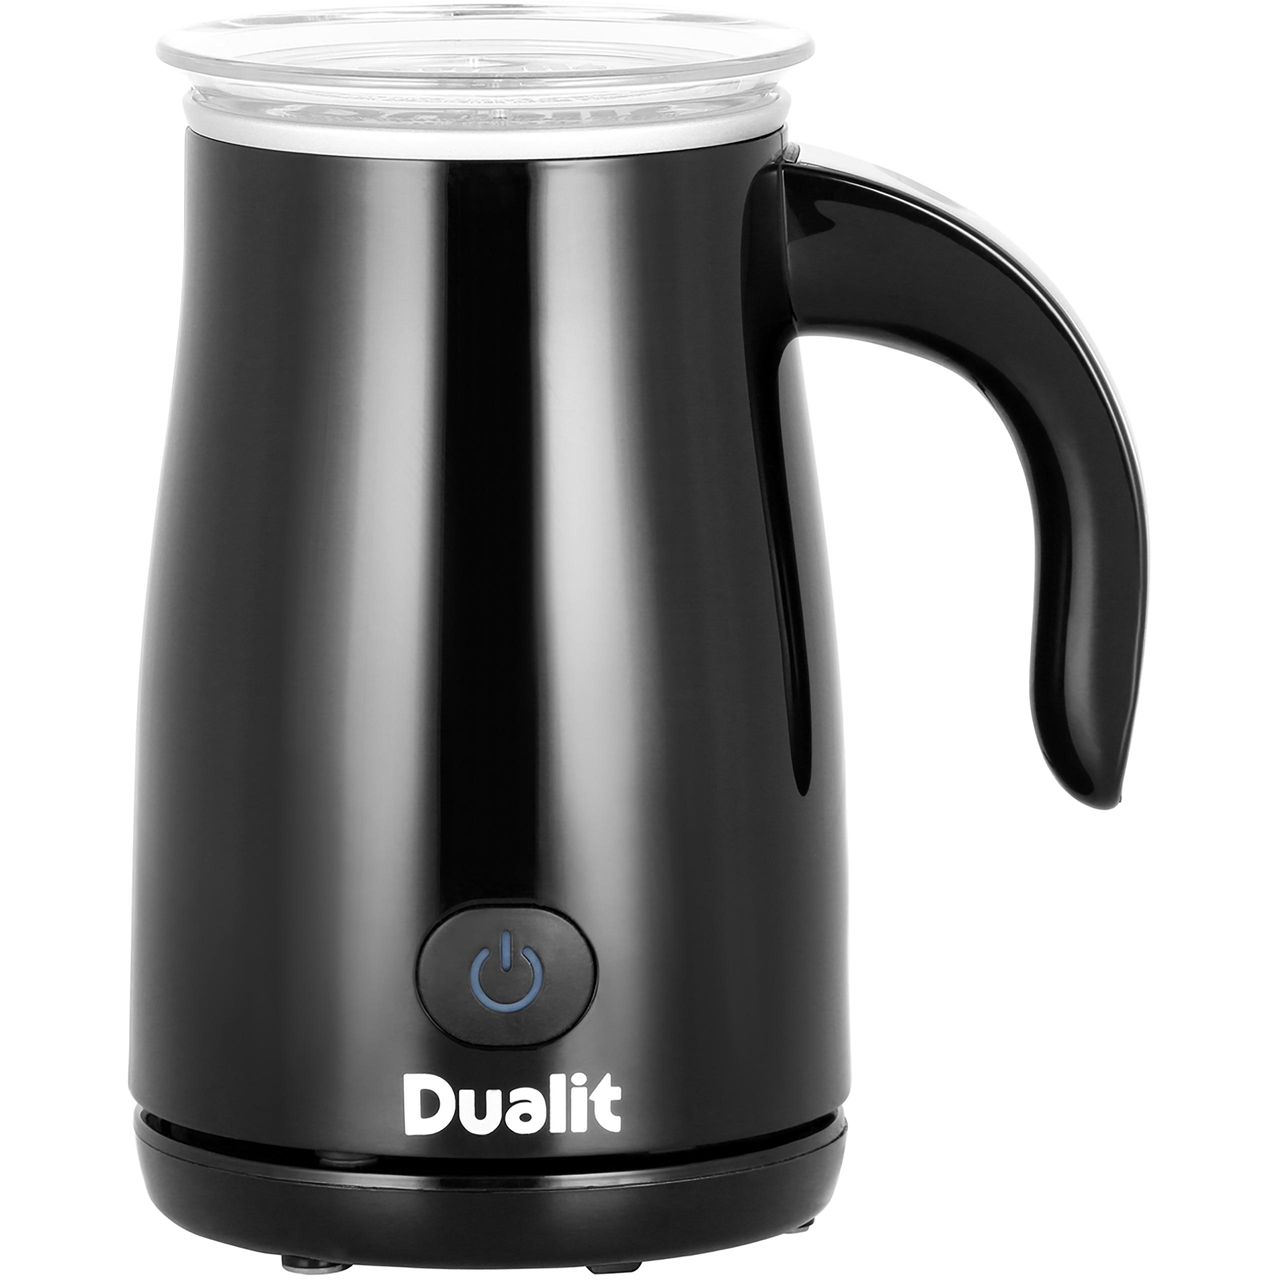 Dualit 84135 Milk Frother Review